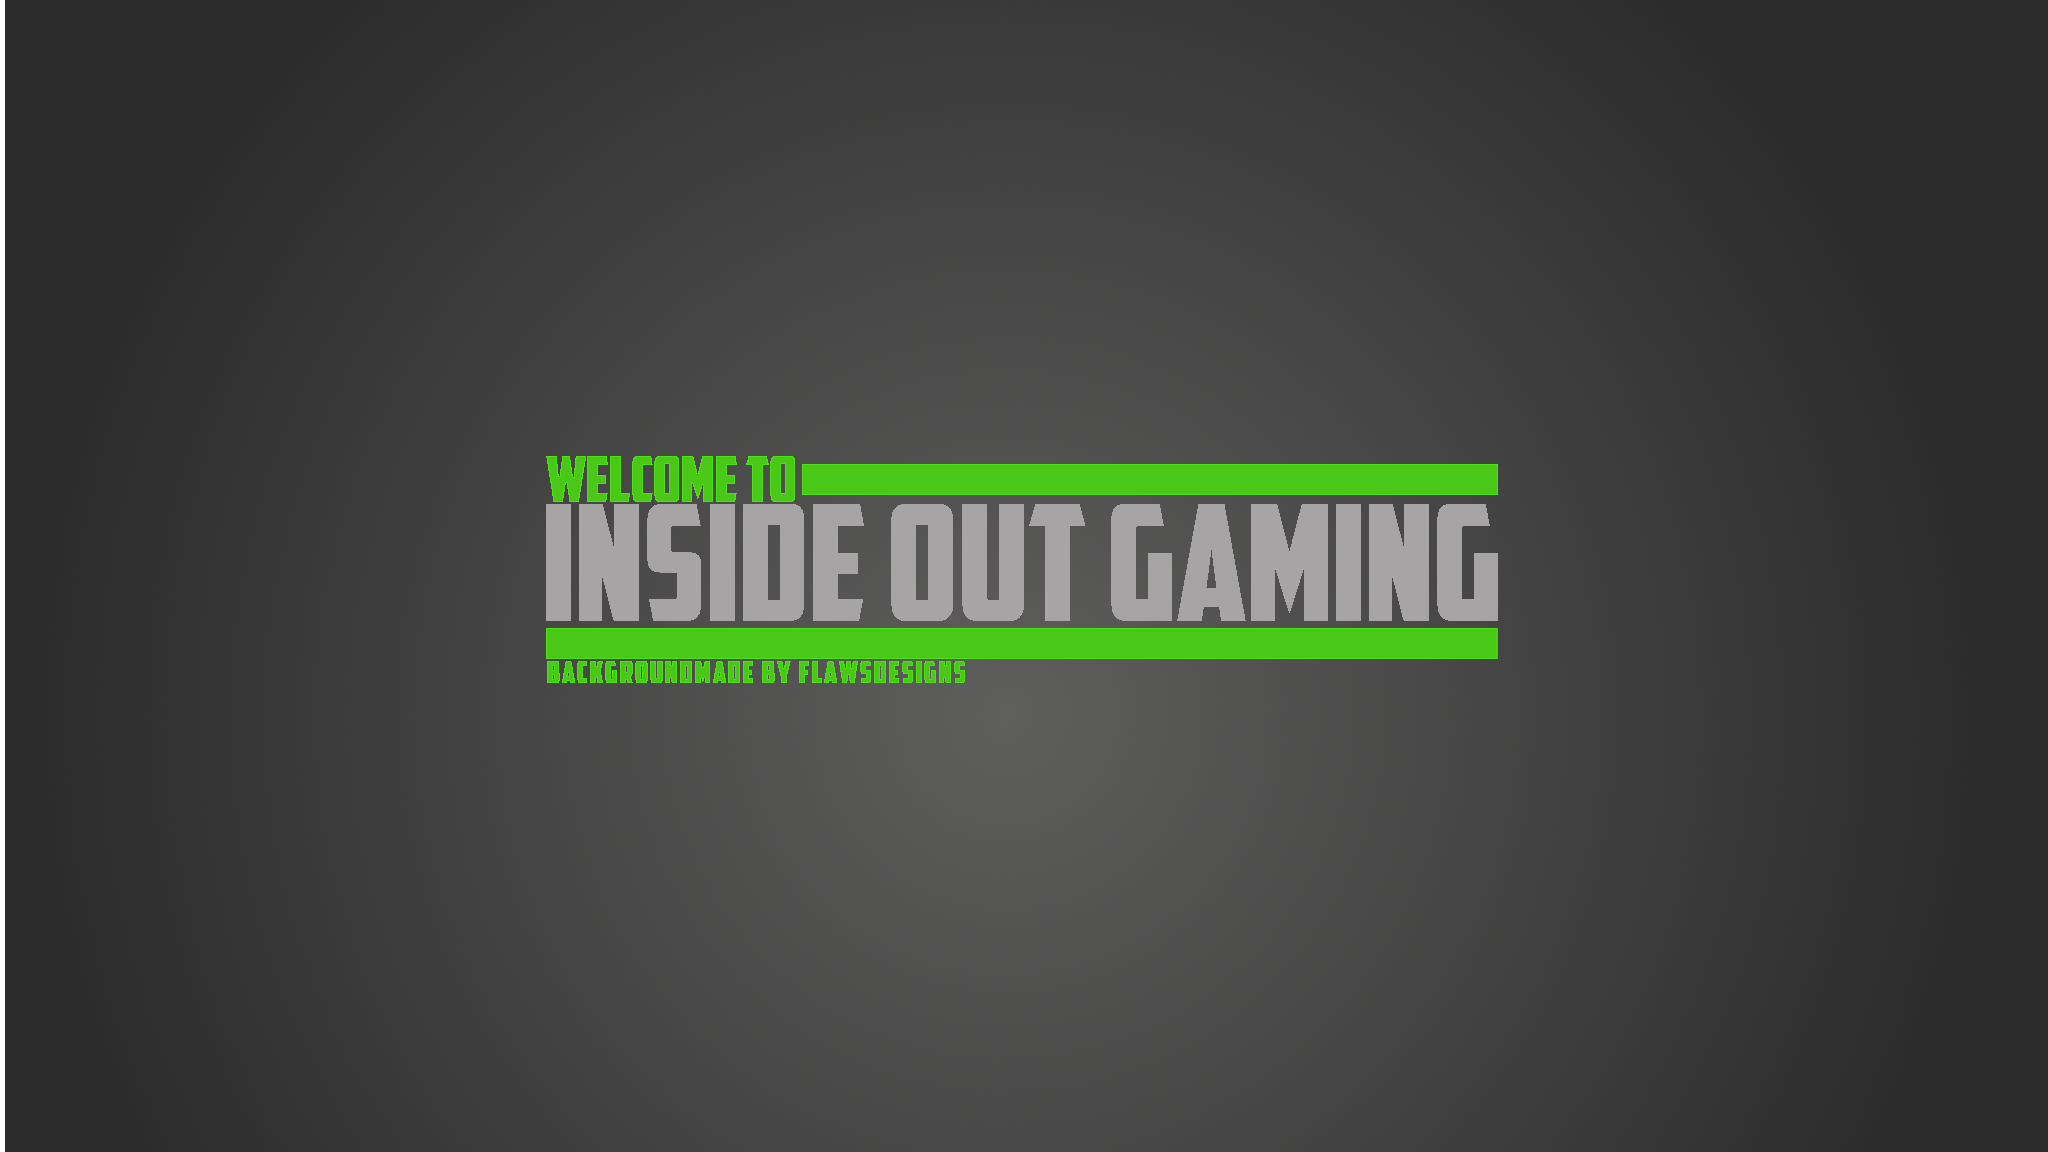 InsideOutGaming YouTube Background by FlawsDesigns on DeviantArt